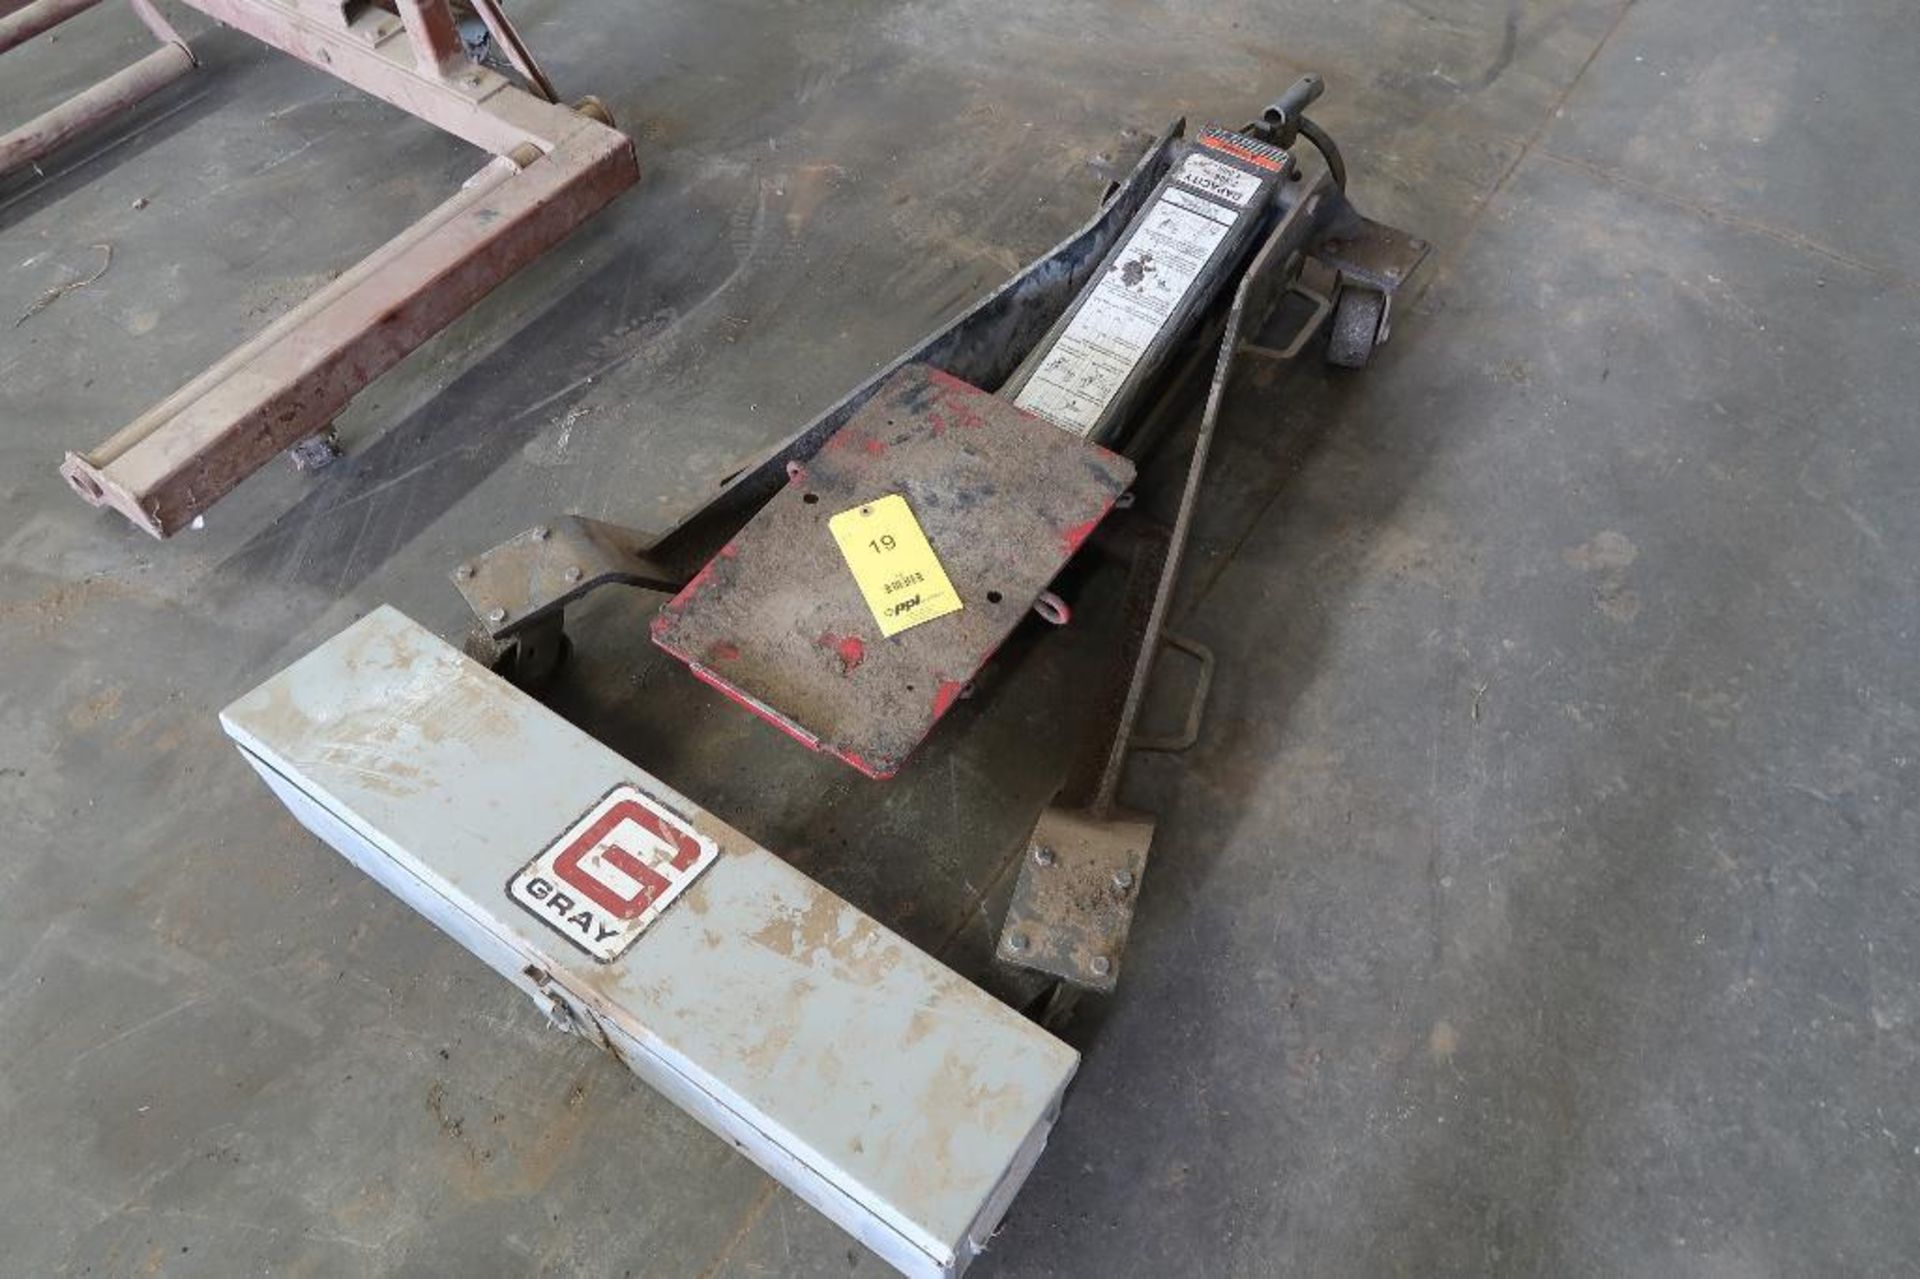 LOT: Gray Multi-Matic Transmission Jack Model MM-2000, 2200 lb. Capacity, with Accessories